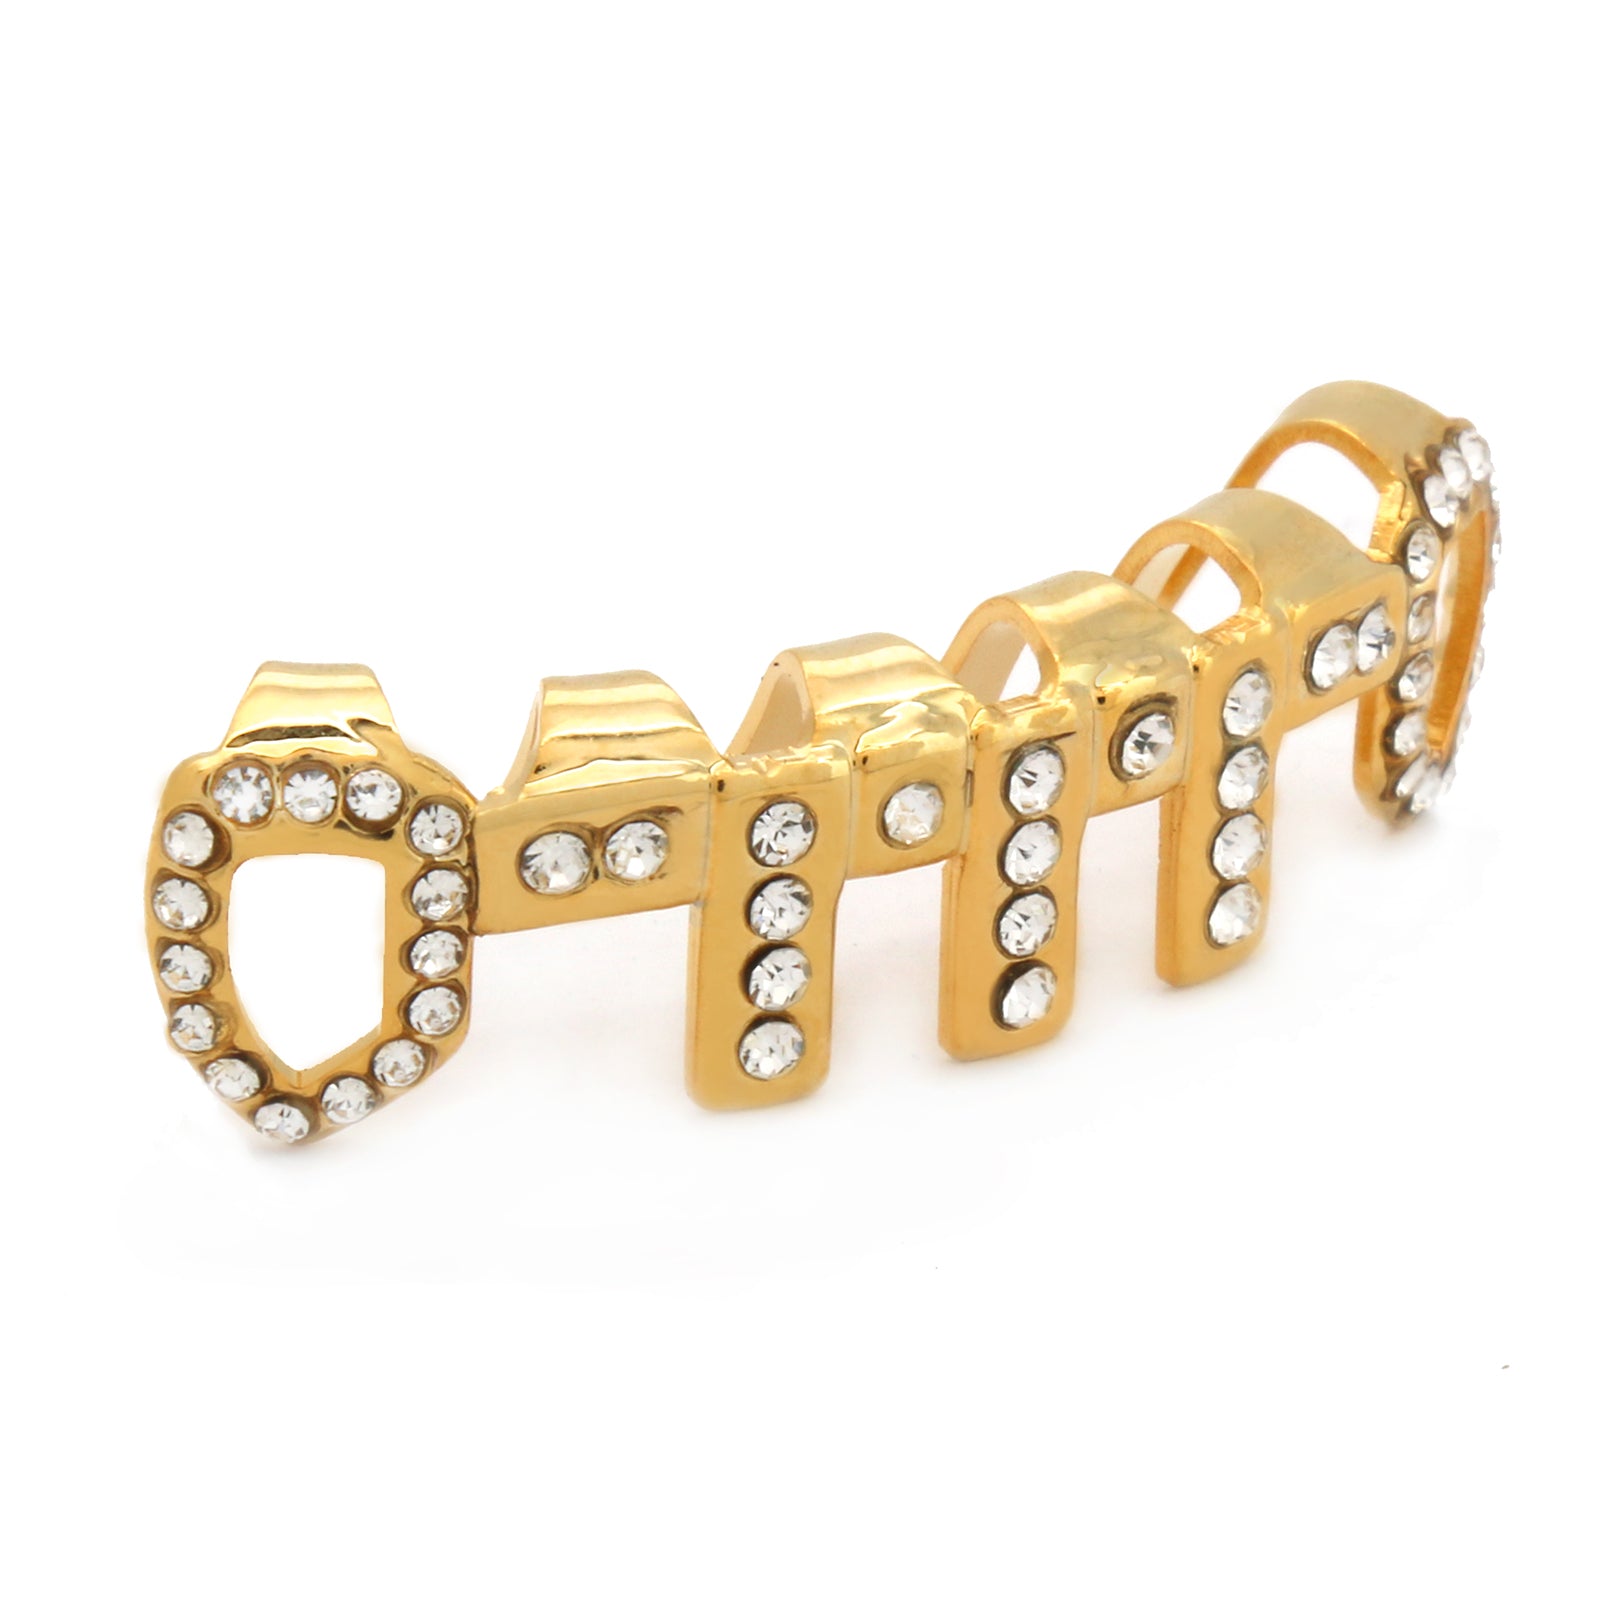 GOLD BOTTOM GRILLZ VERTICAL BARS ICE OUT